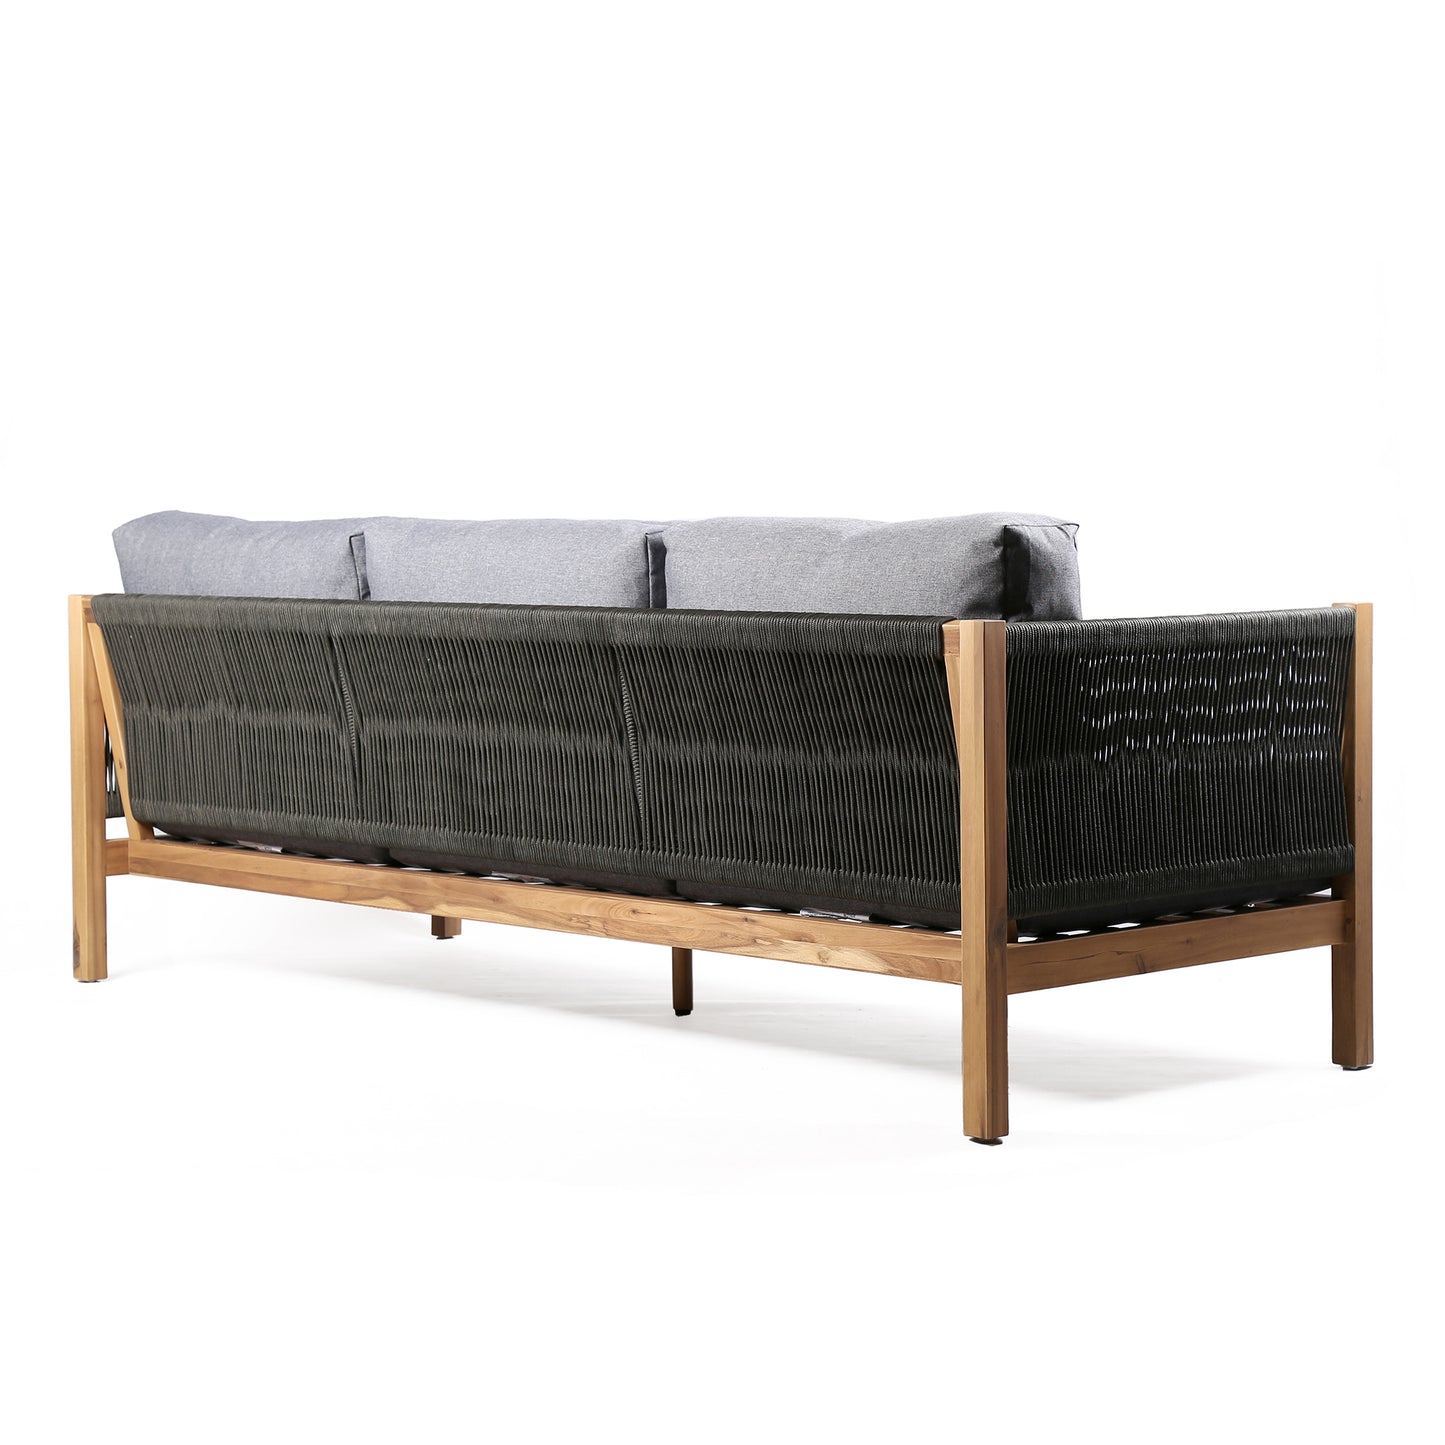 Sienna 4 Piece Eucalyptus Wood Outdoor Sofa Seating Set with Teak Finish and Gray Cushions